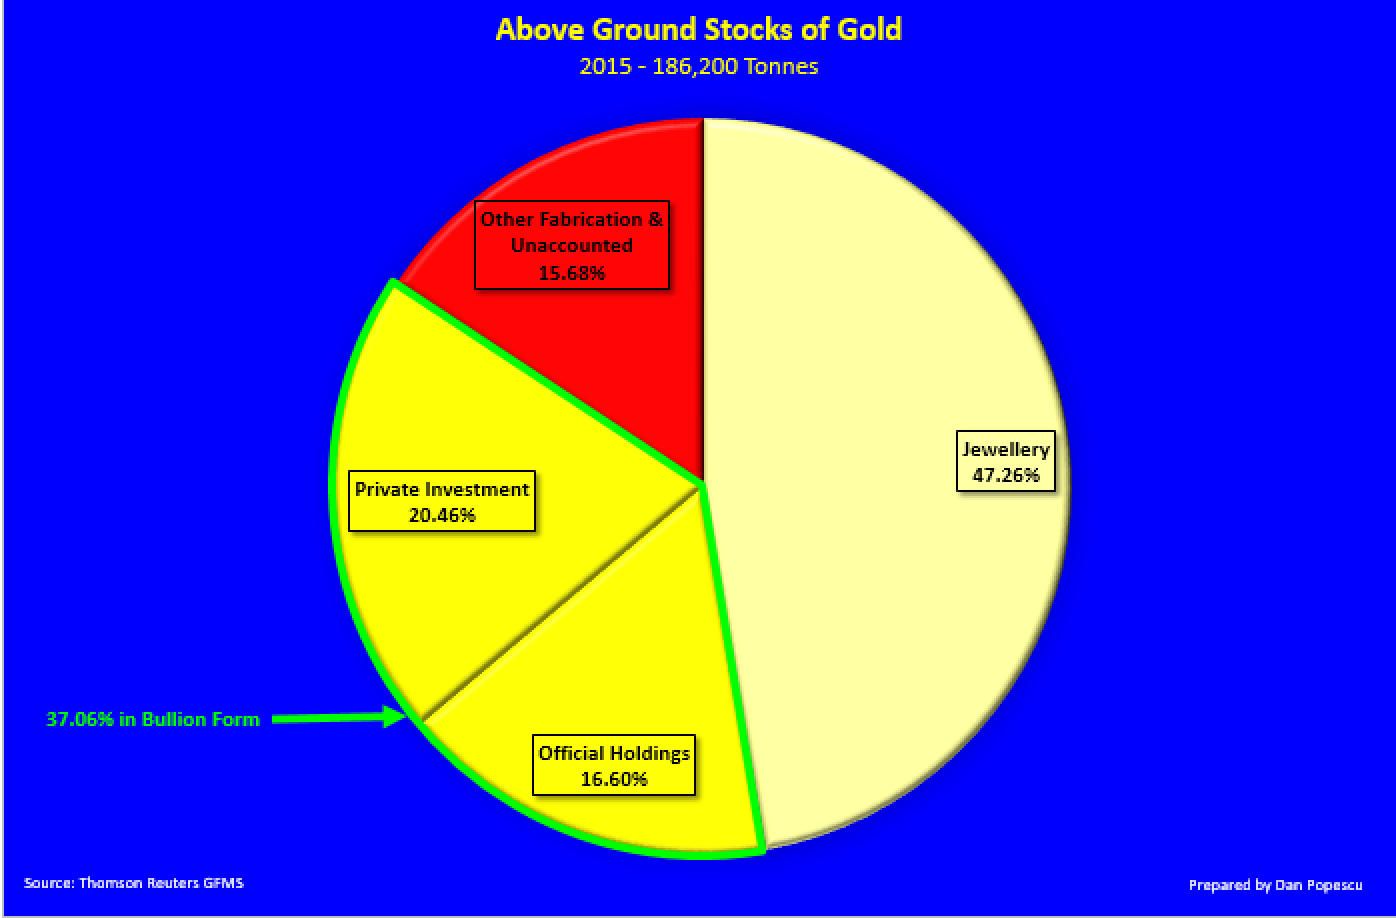 Above ground stocks of gold